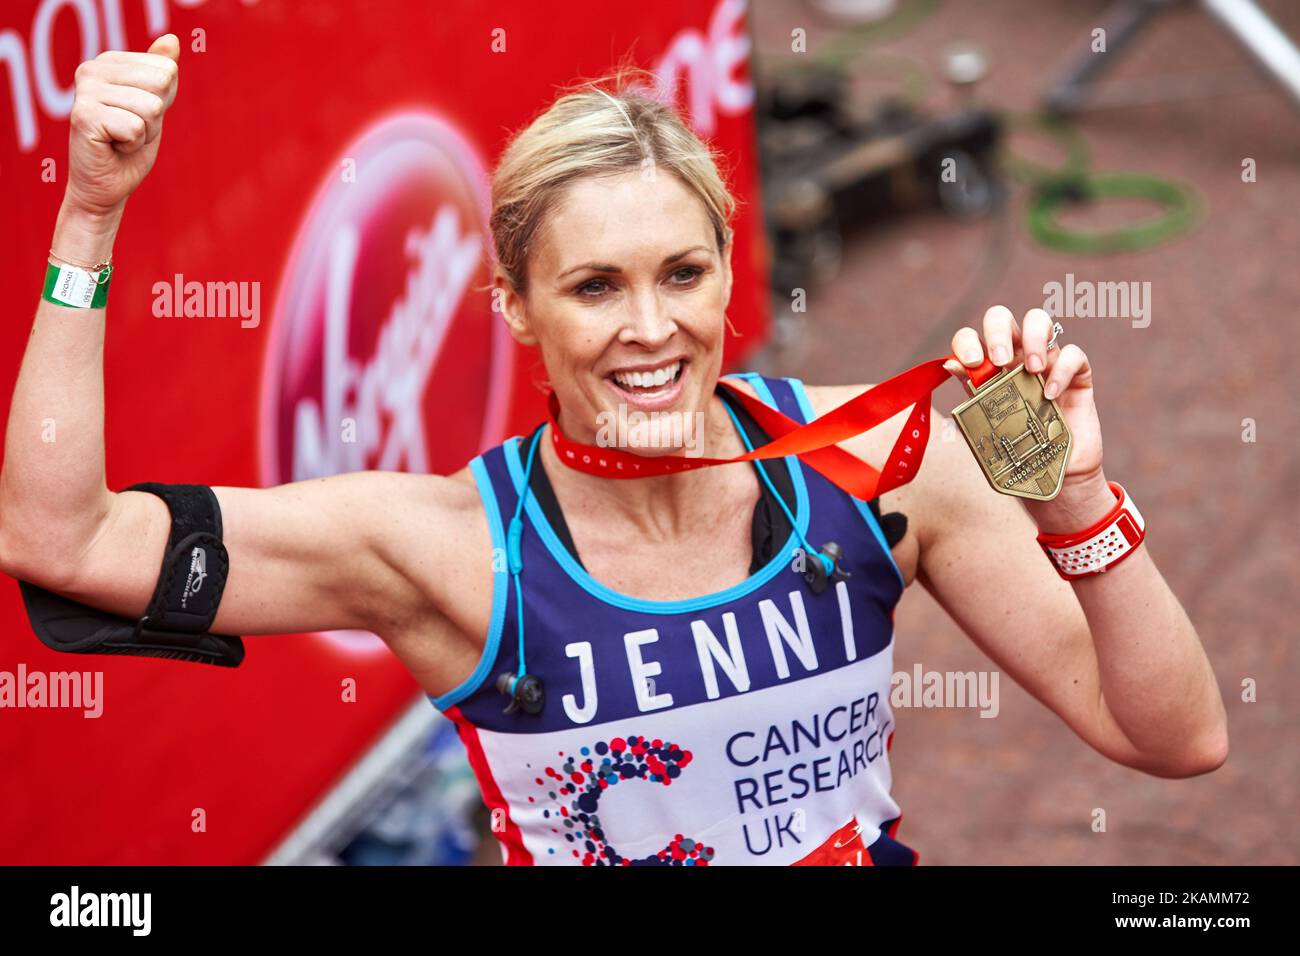 Jenni Falconer poses for a photo after completing the Virgin London Marathon on April 23, 2017 in London, England. (Photo by Karyn Louise/NurPhoto) *** Please Use Credit from Credit Field *** Stock Photo